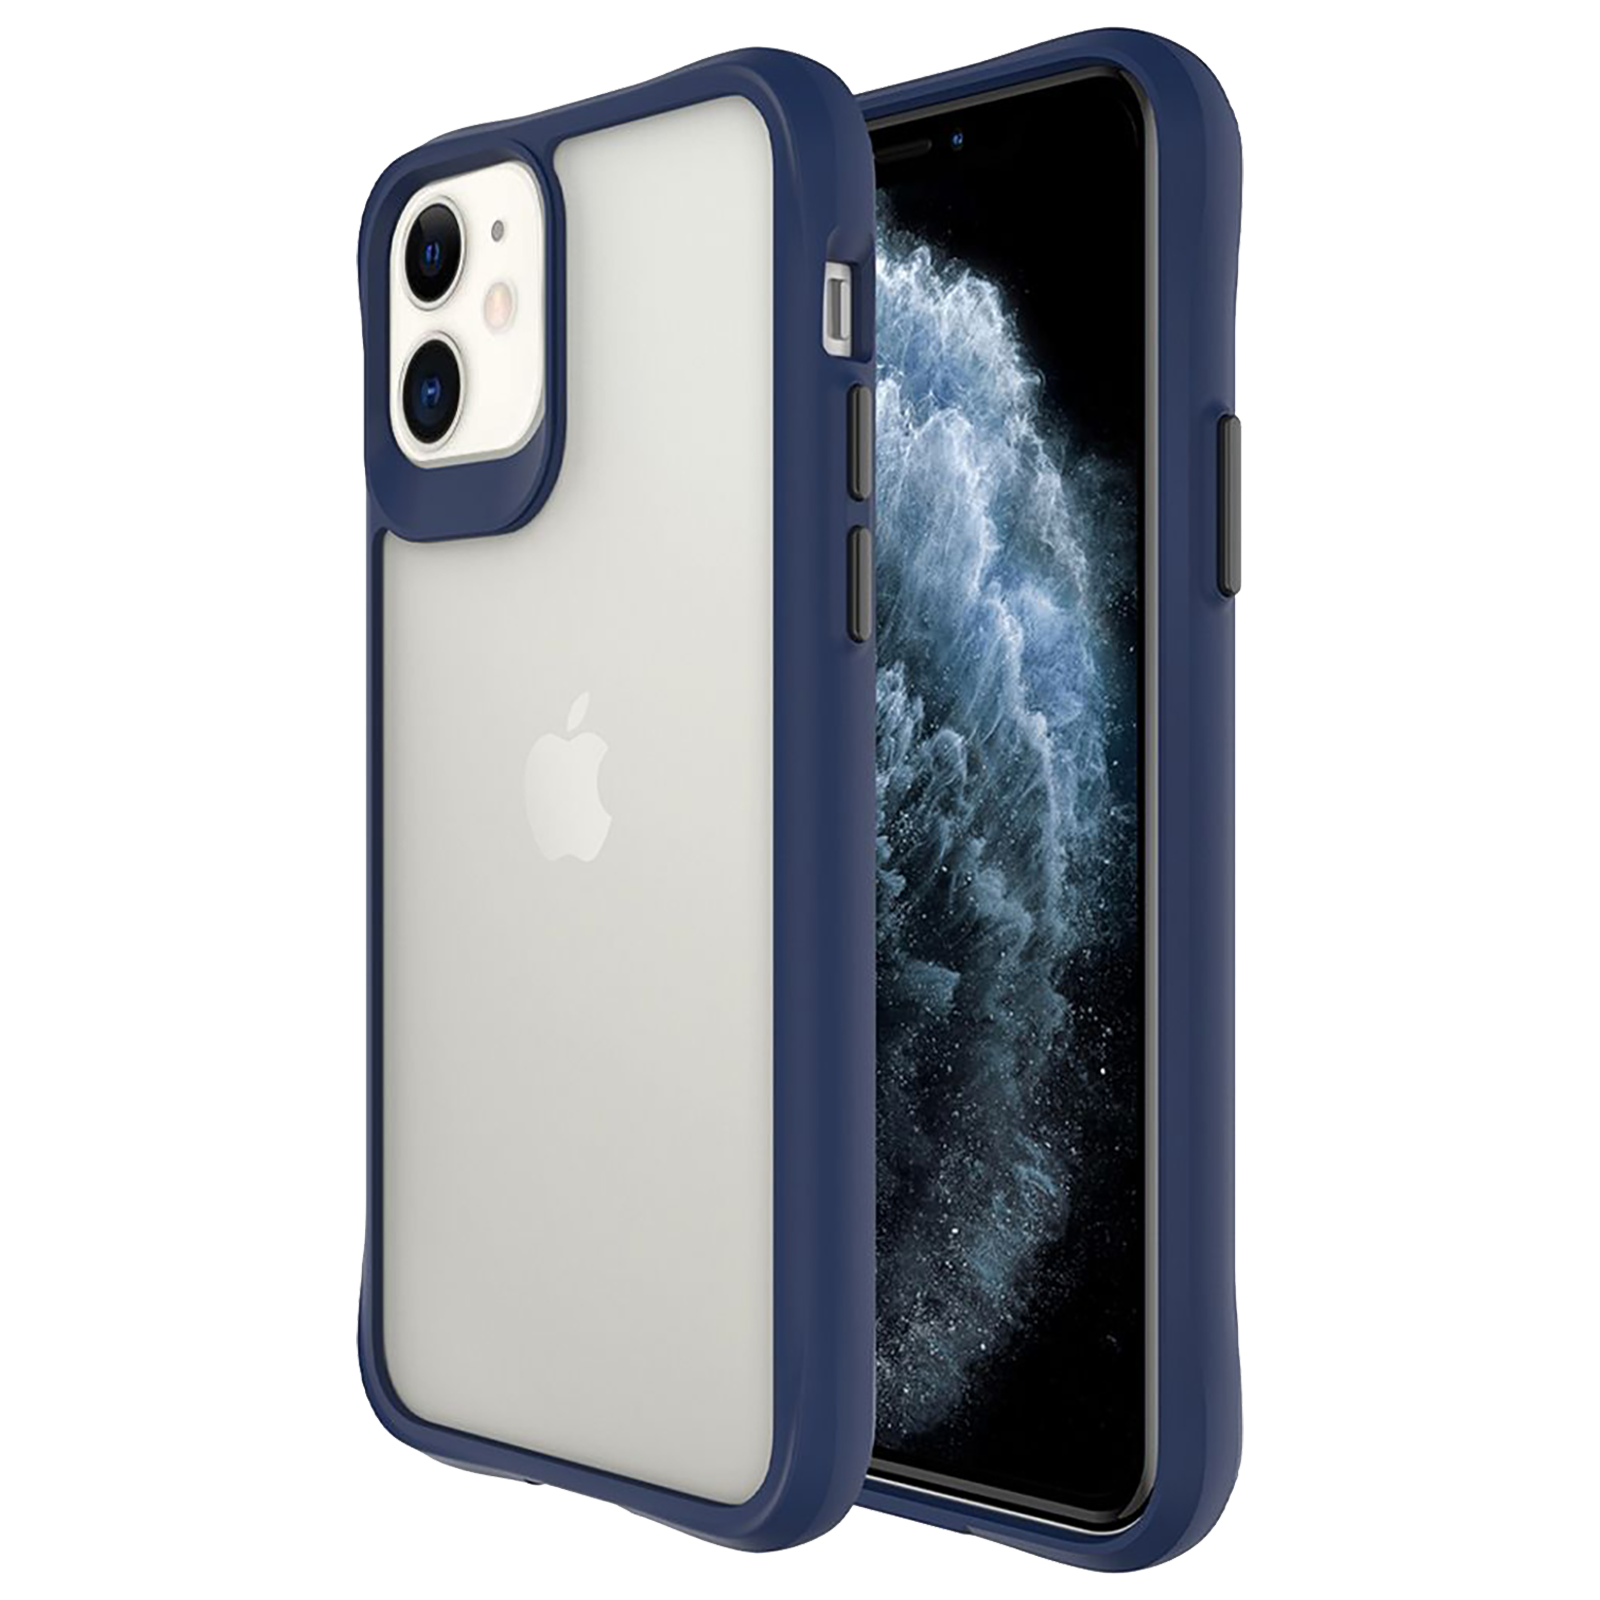 Baseus Touchable Glass Flip TPU Back Shell Case For iPhone XS – Casewale